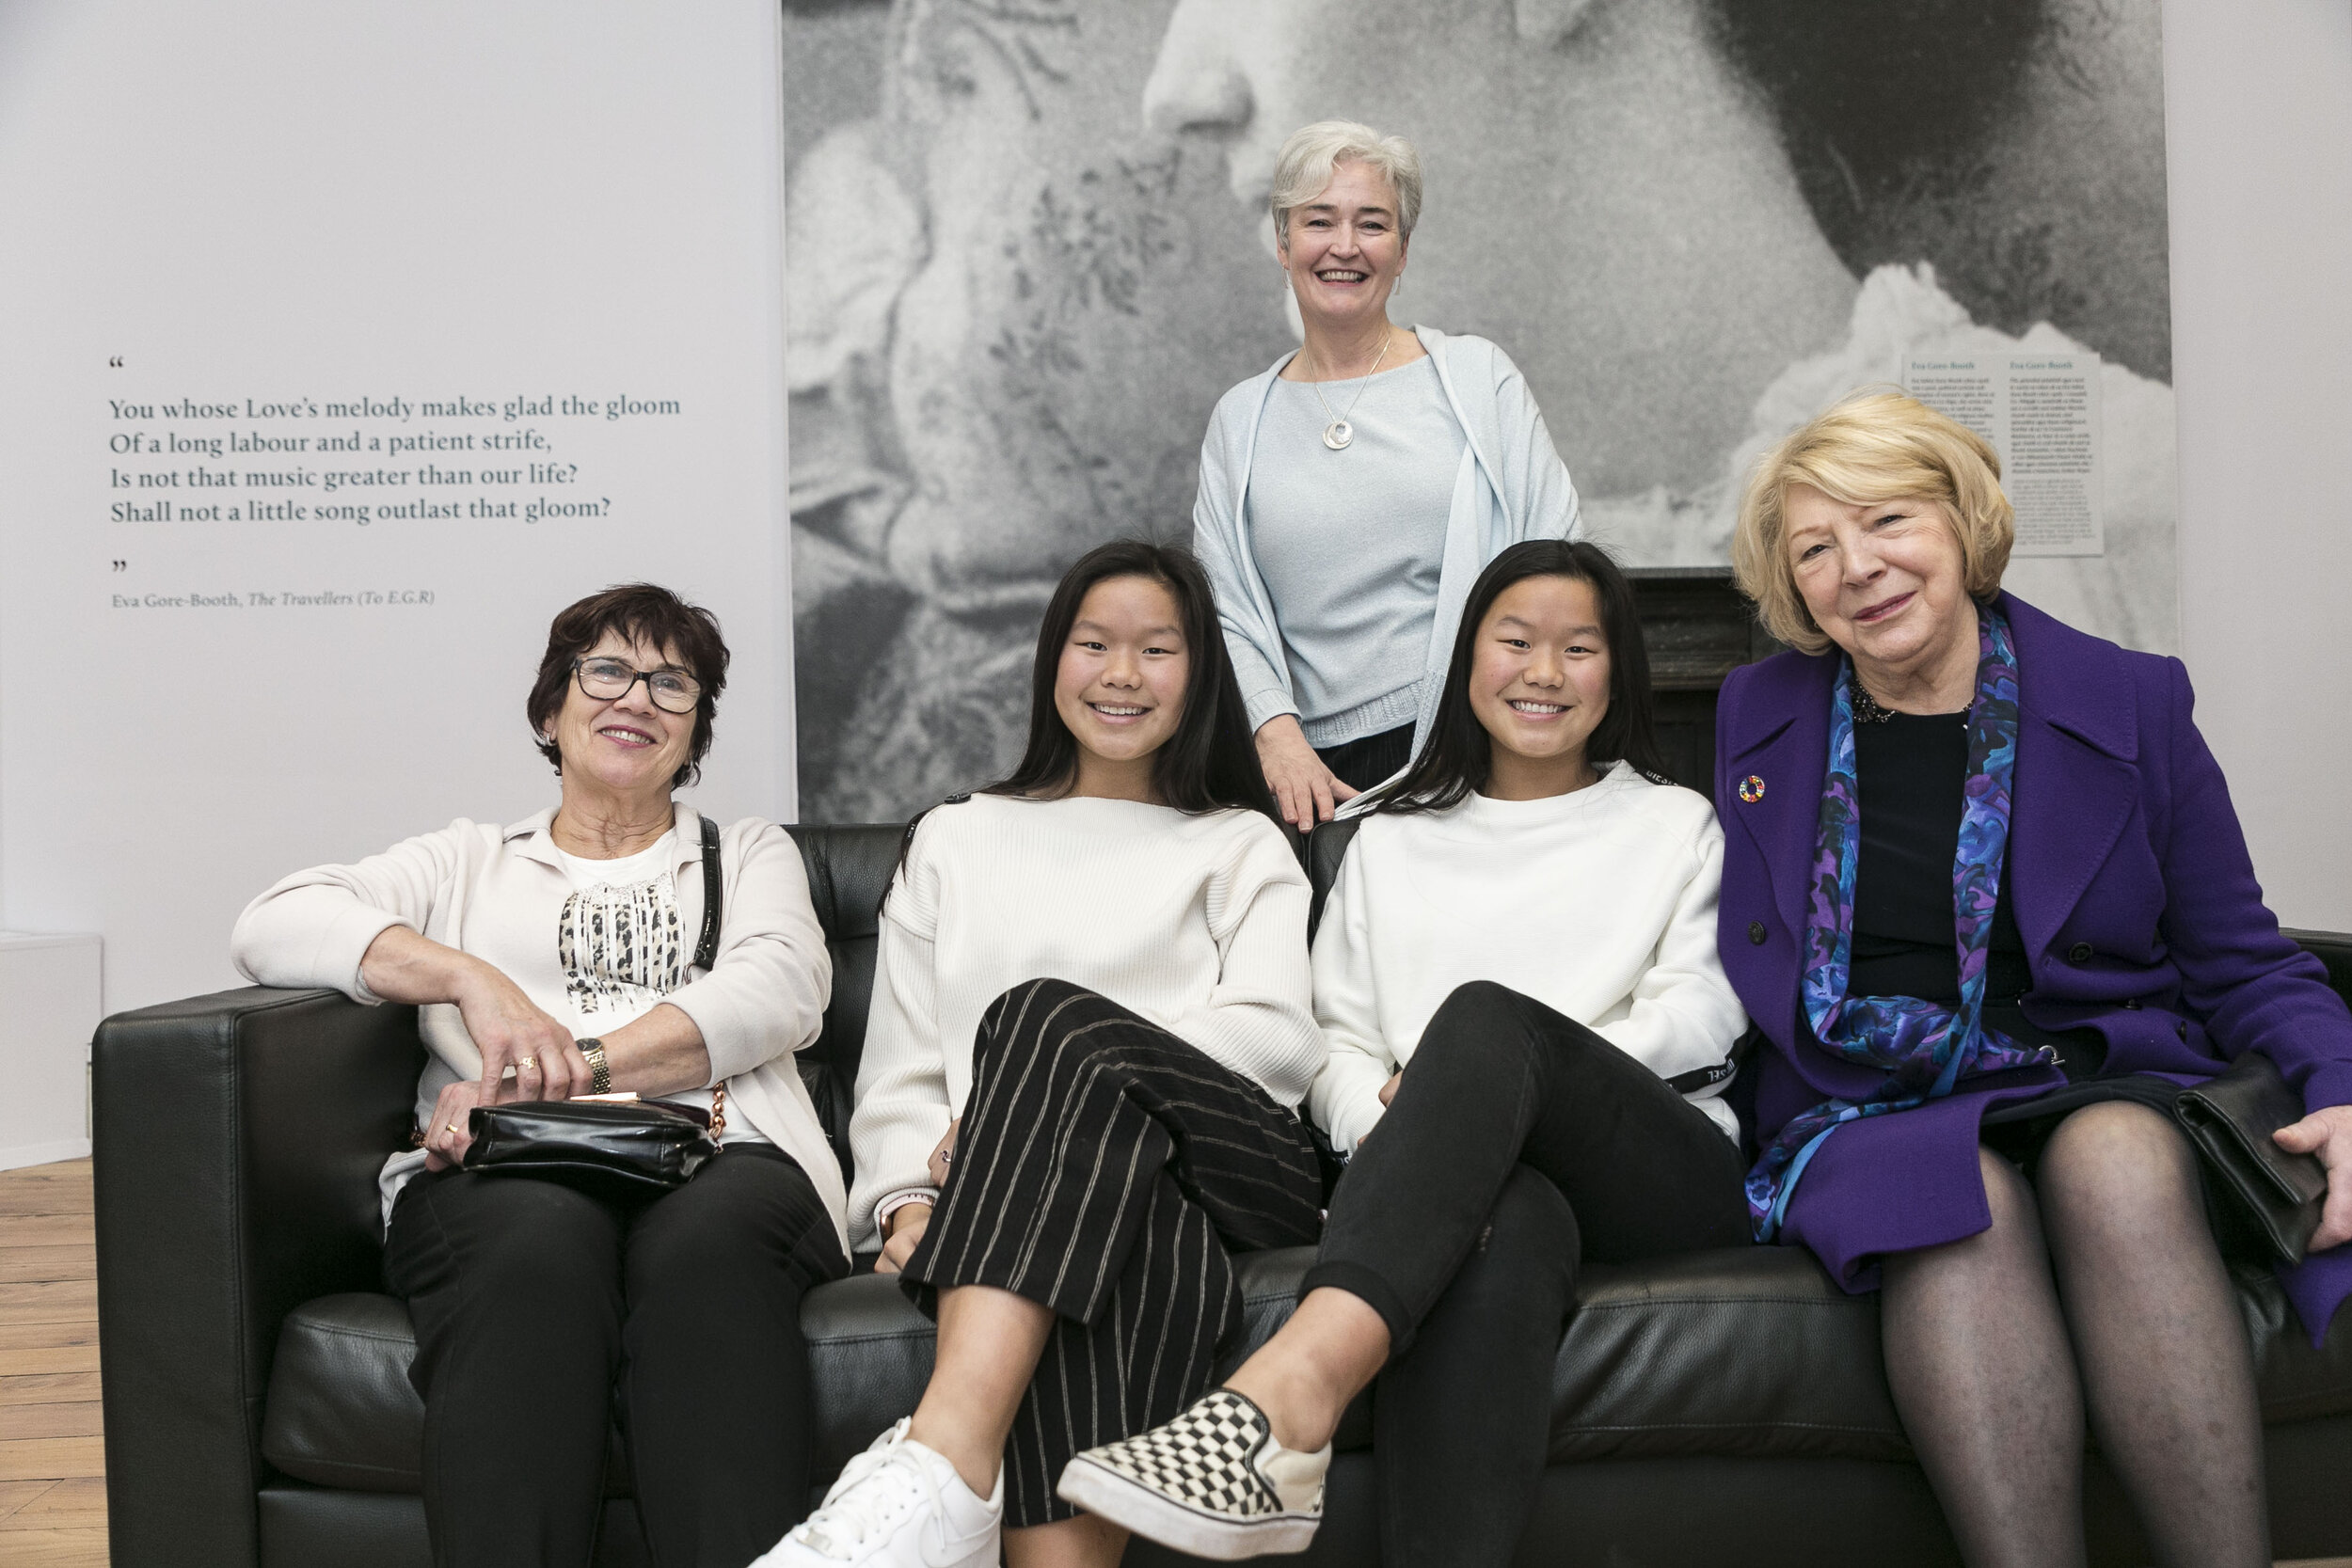  Mary Gillan, Anna and Ellen Hamilton with Sabina Higgins and Martina Hamilton before the doors open.    Hamilton Gallery / MoLi / DFAT - exhibition opening by Sabina Higgins of "Eva Gore-Booth 93 Irish women artists respond to her life and work", pa